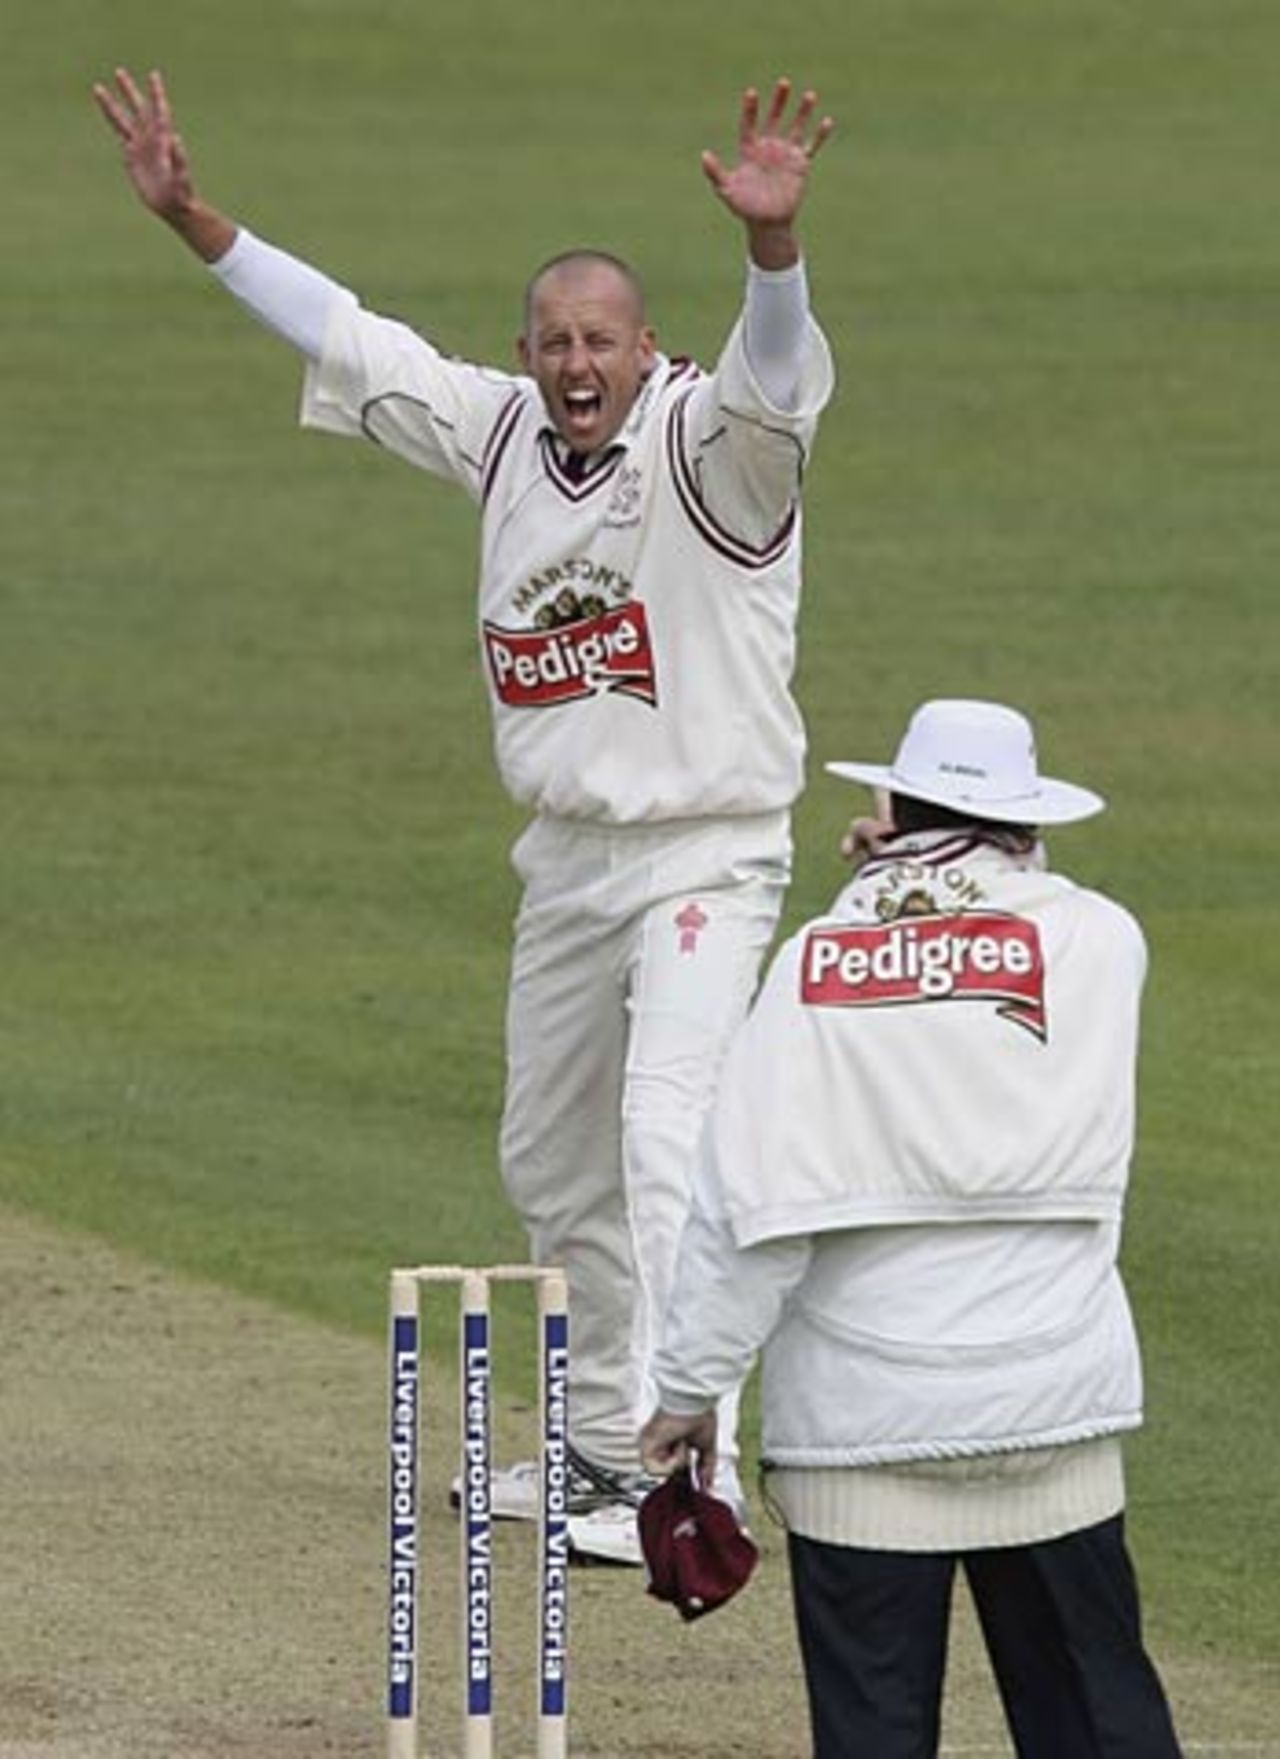 Charl Willoughby has an appeal upheld, Gloucestershire v Somerset, County Championship, Bristol, April 19, 2006